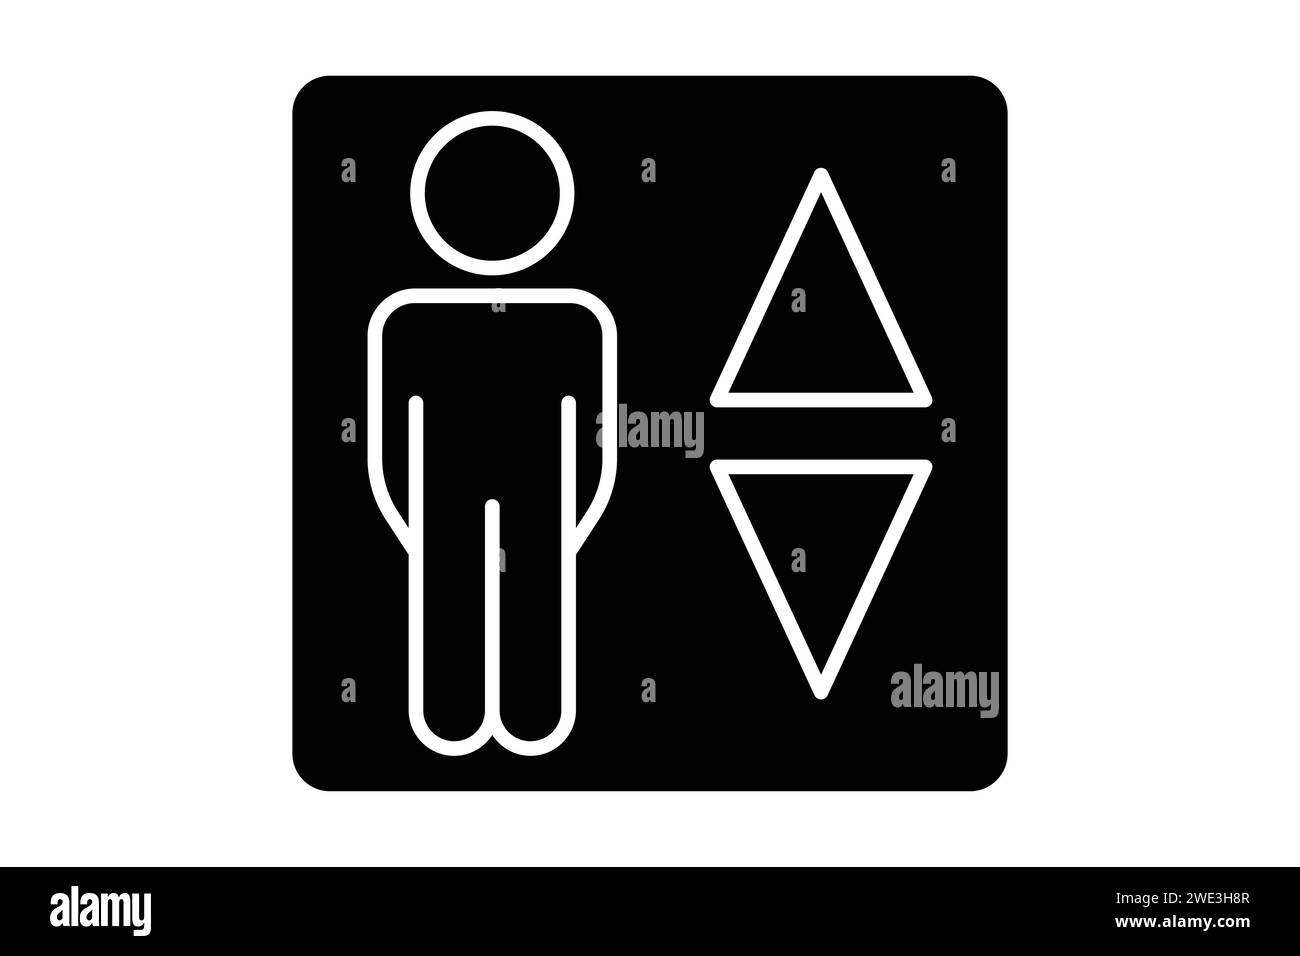 elevator icon. icon related to indoor navigation in public spaces. solid icon style. element illustration Stock Vector